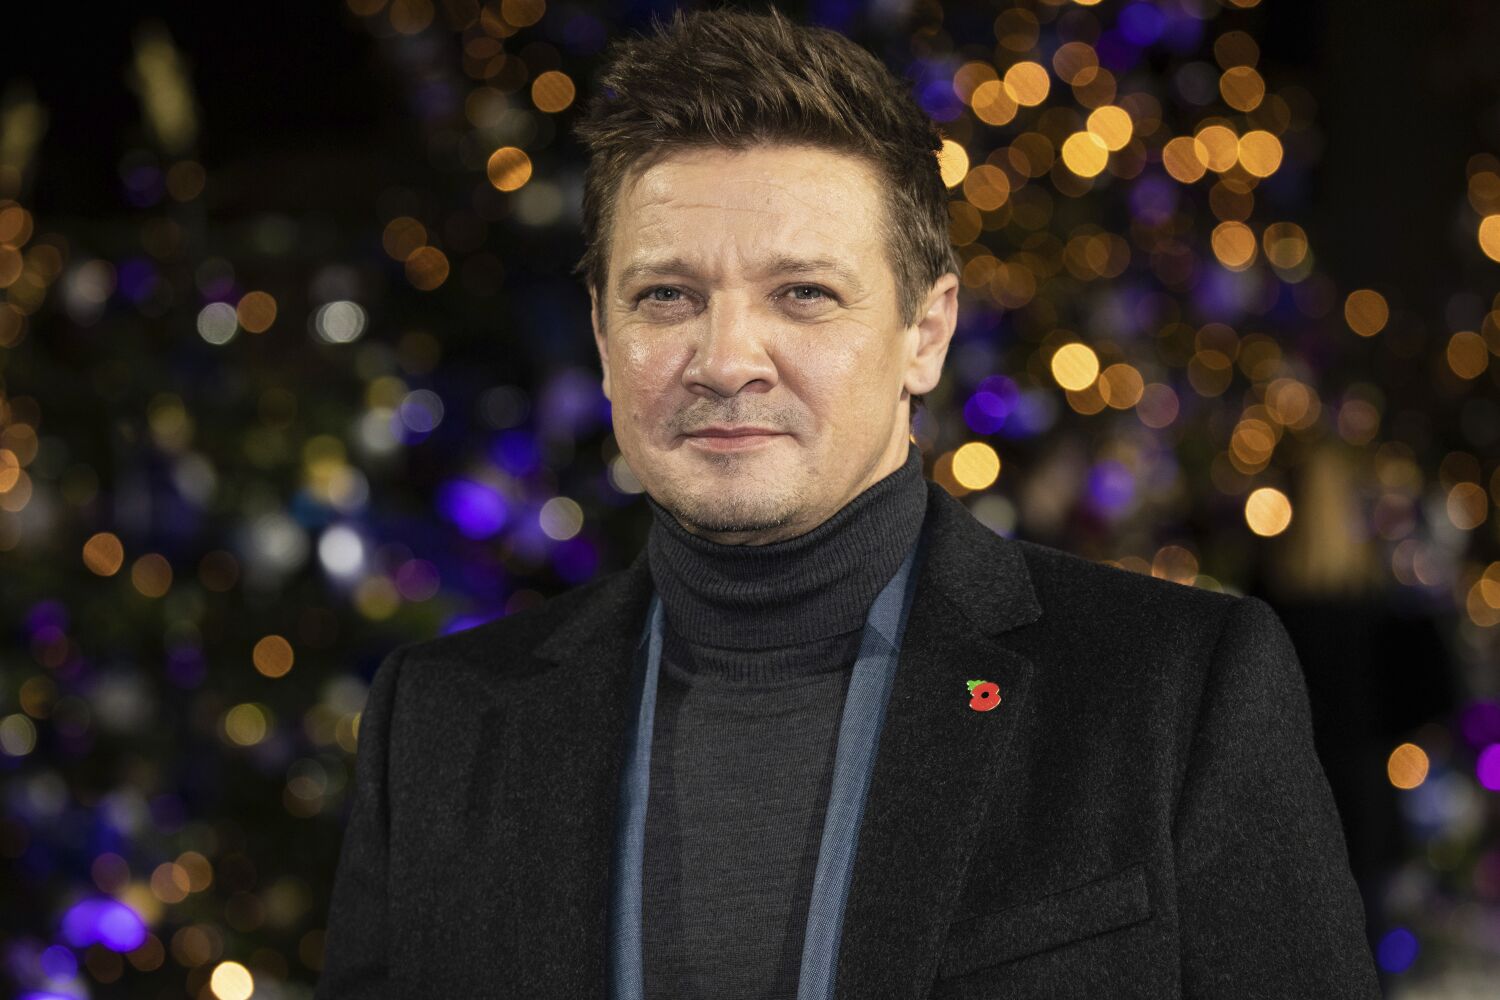 'I chose to survive': Jeremy Renner tells all in first interview after snowplow accident